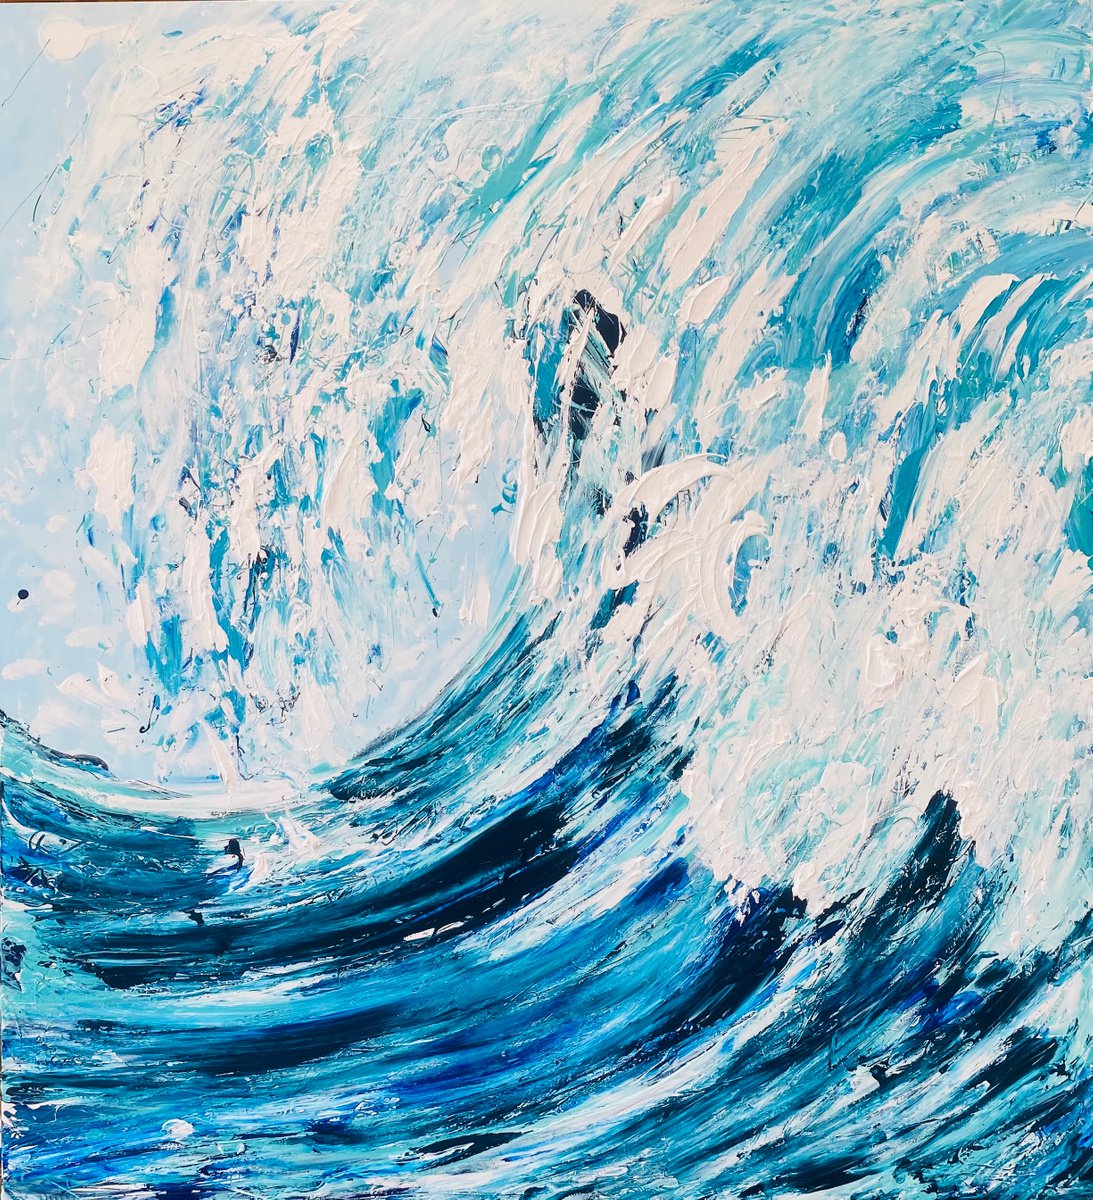 Wave Series - Swell by Annette Spinks